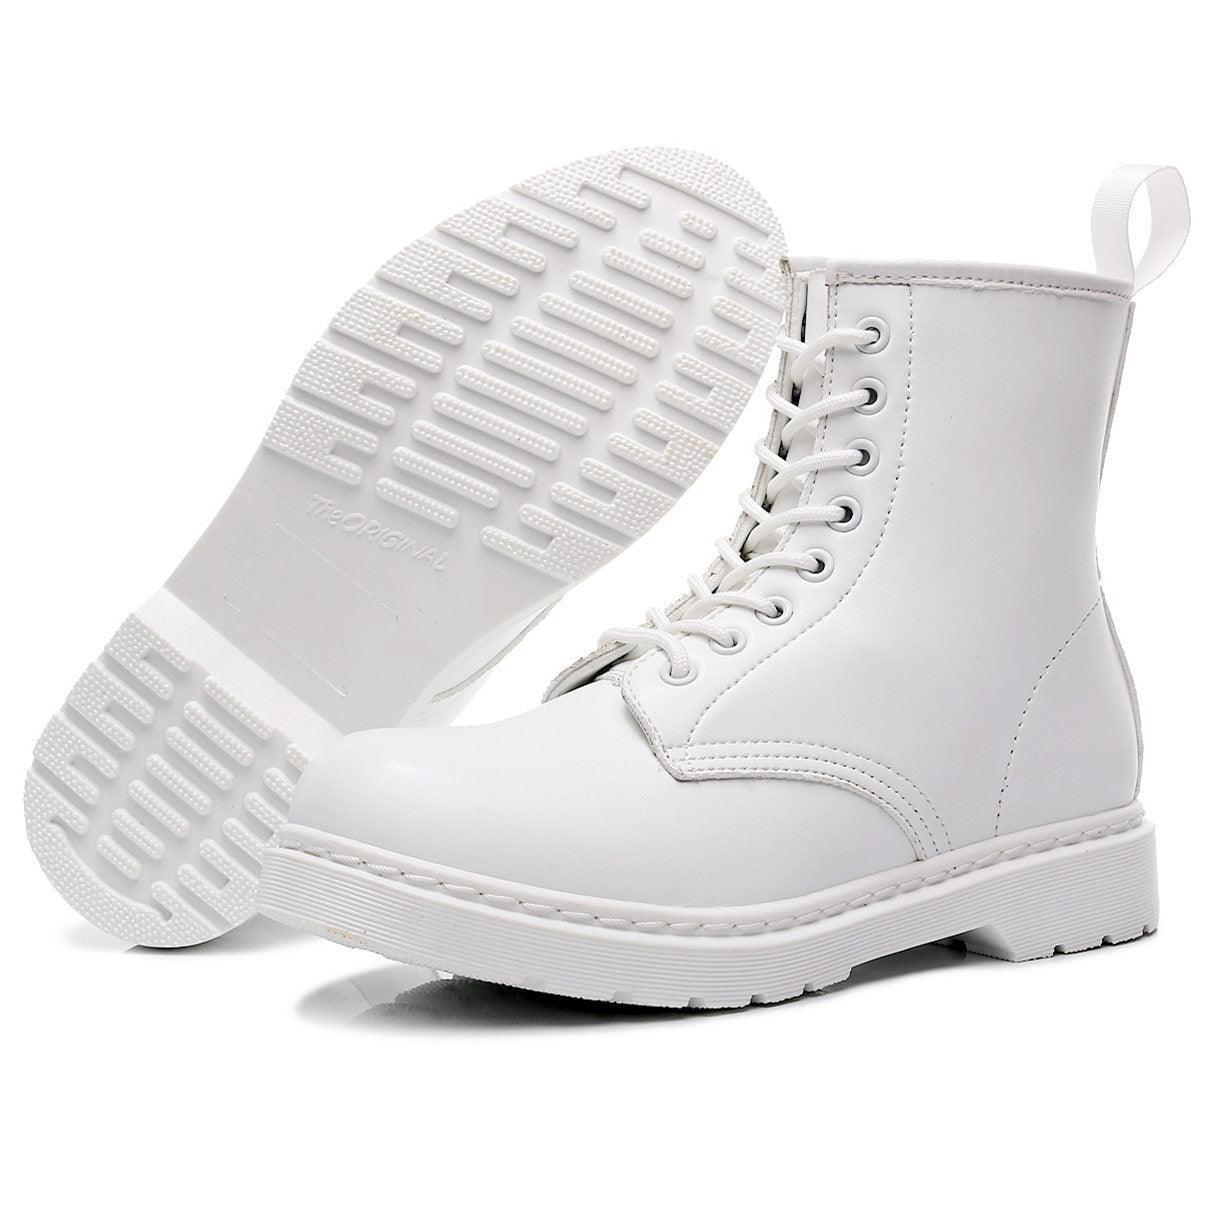 Eight-Hole British Style Short Boots - ForVanity boots, women's shoes Shoes